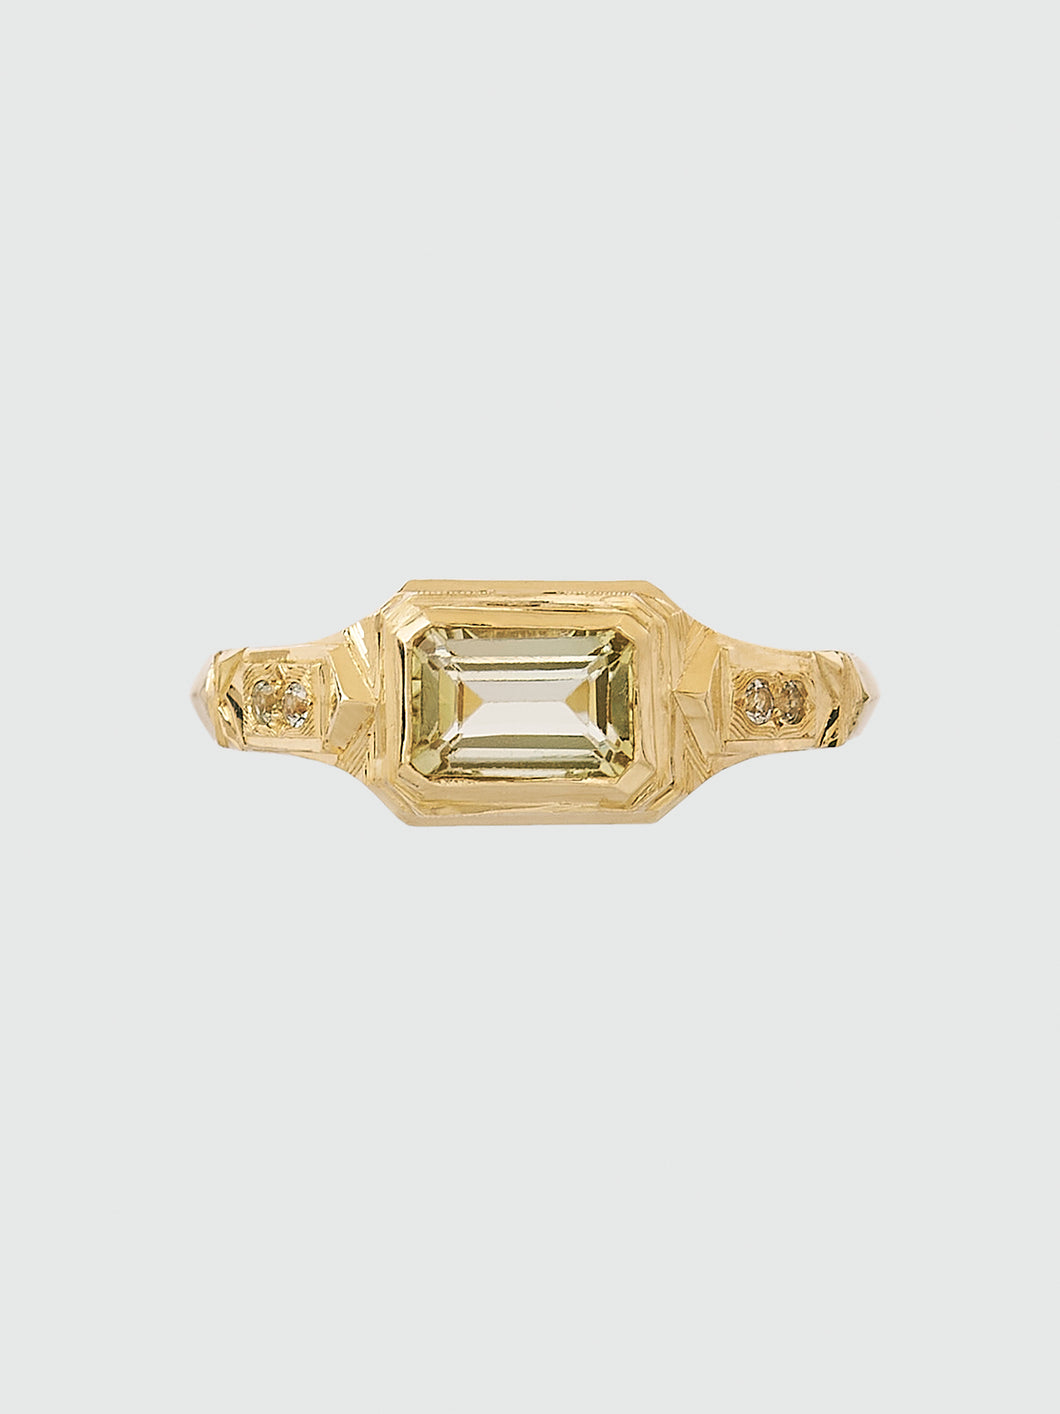 'Eima' ring :: Pale green tourmaline with sapphire side stones :: Ready to ship